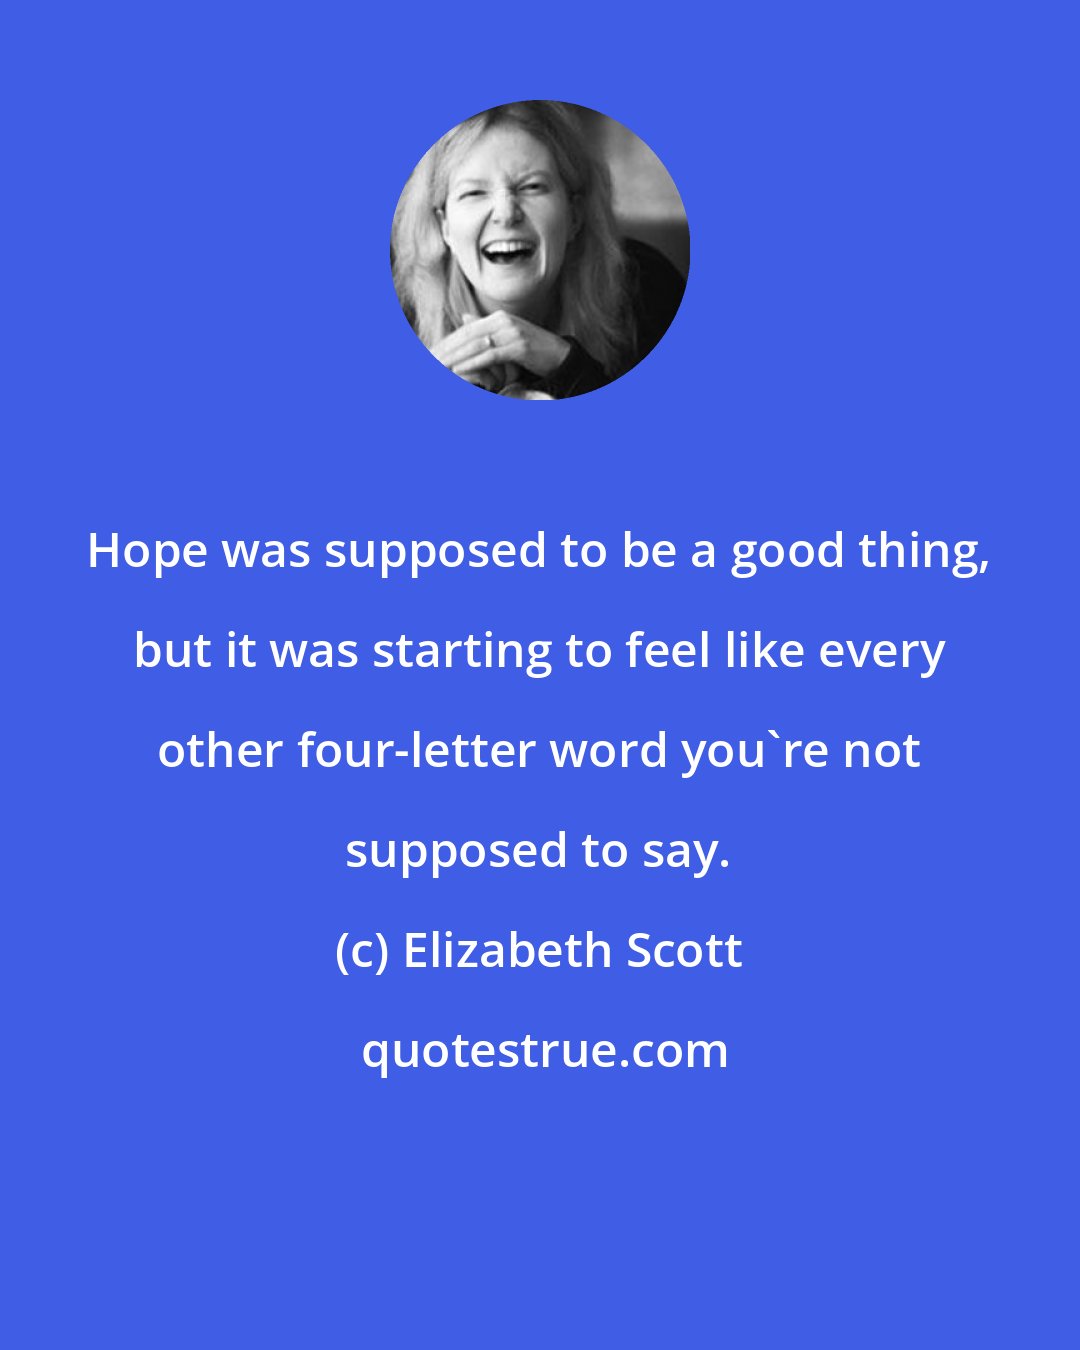 Elizabeth Scott: Hope was supposed to be a good thing, but it was starting to feel like every other four-letter word you're not supposed to say.